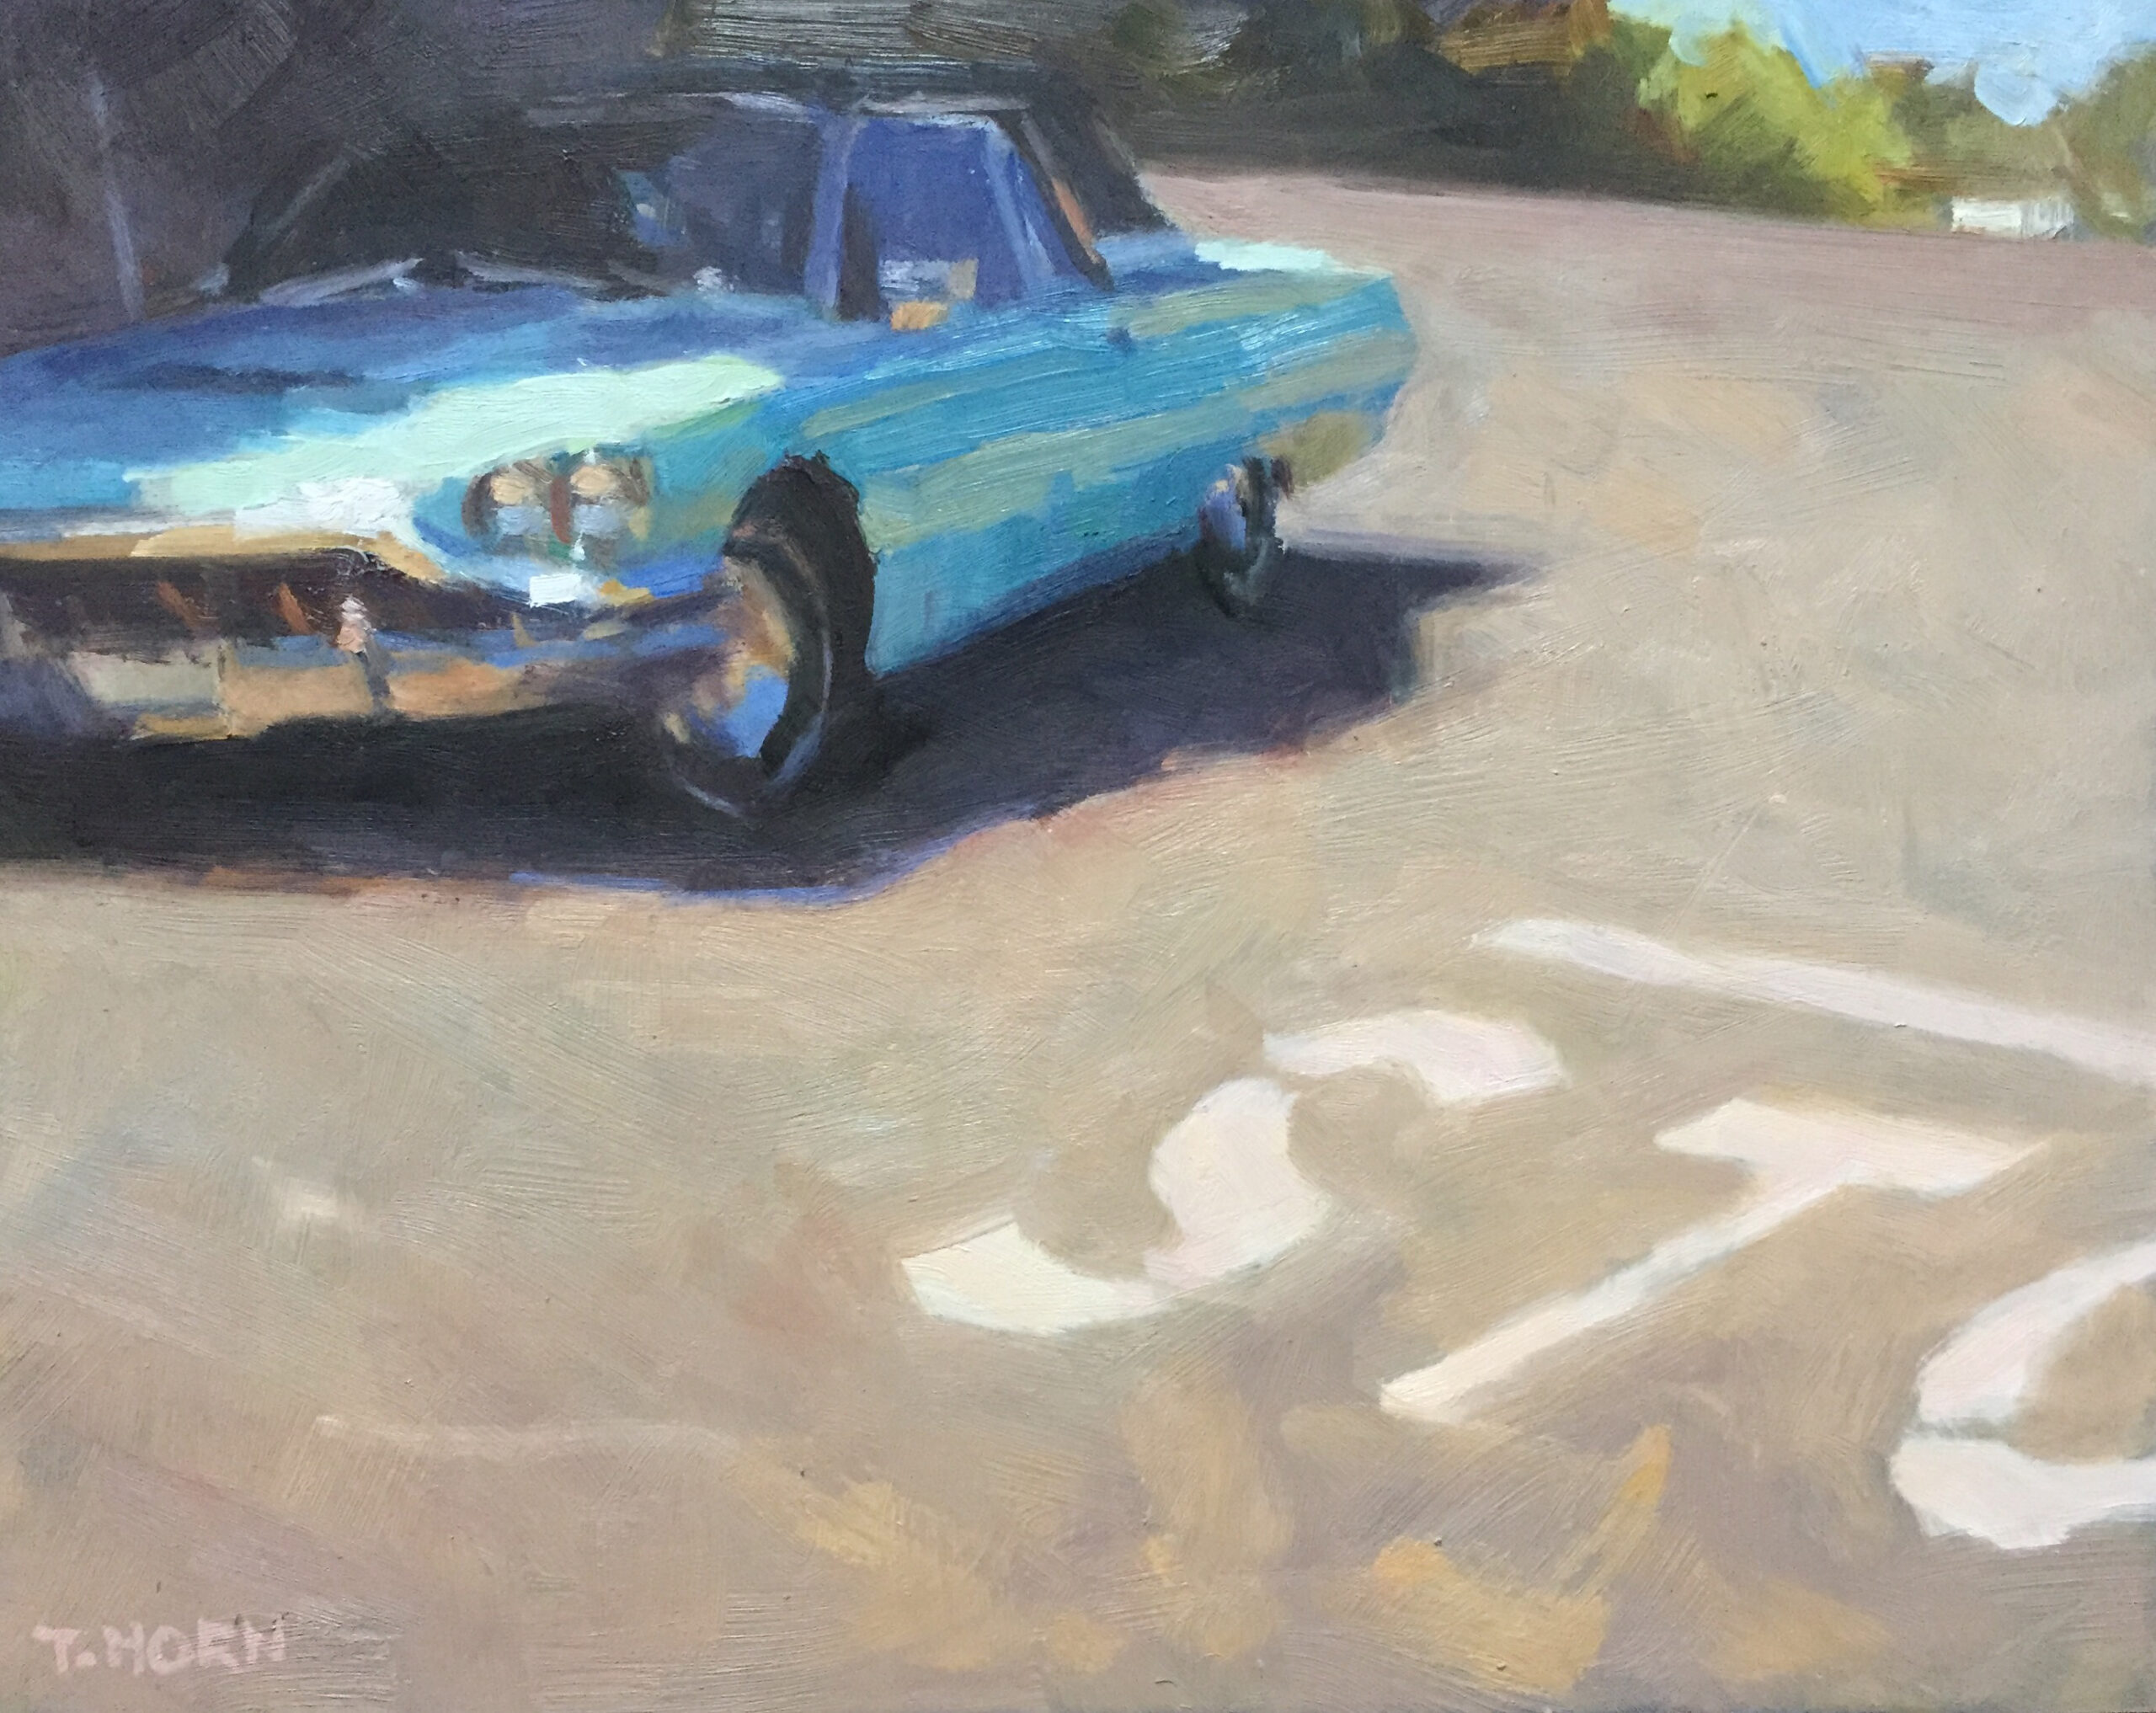 Timothy Horn, “T-Bird Away,” 2017, oil, 8 x 10 in., Private collection, Plein air and studio